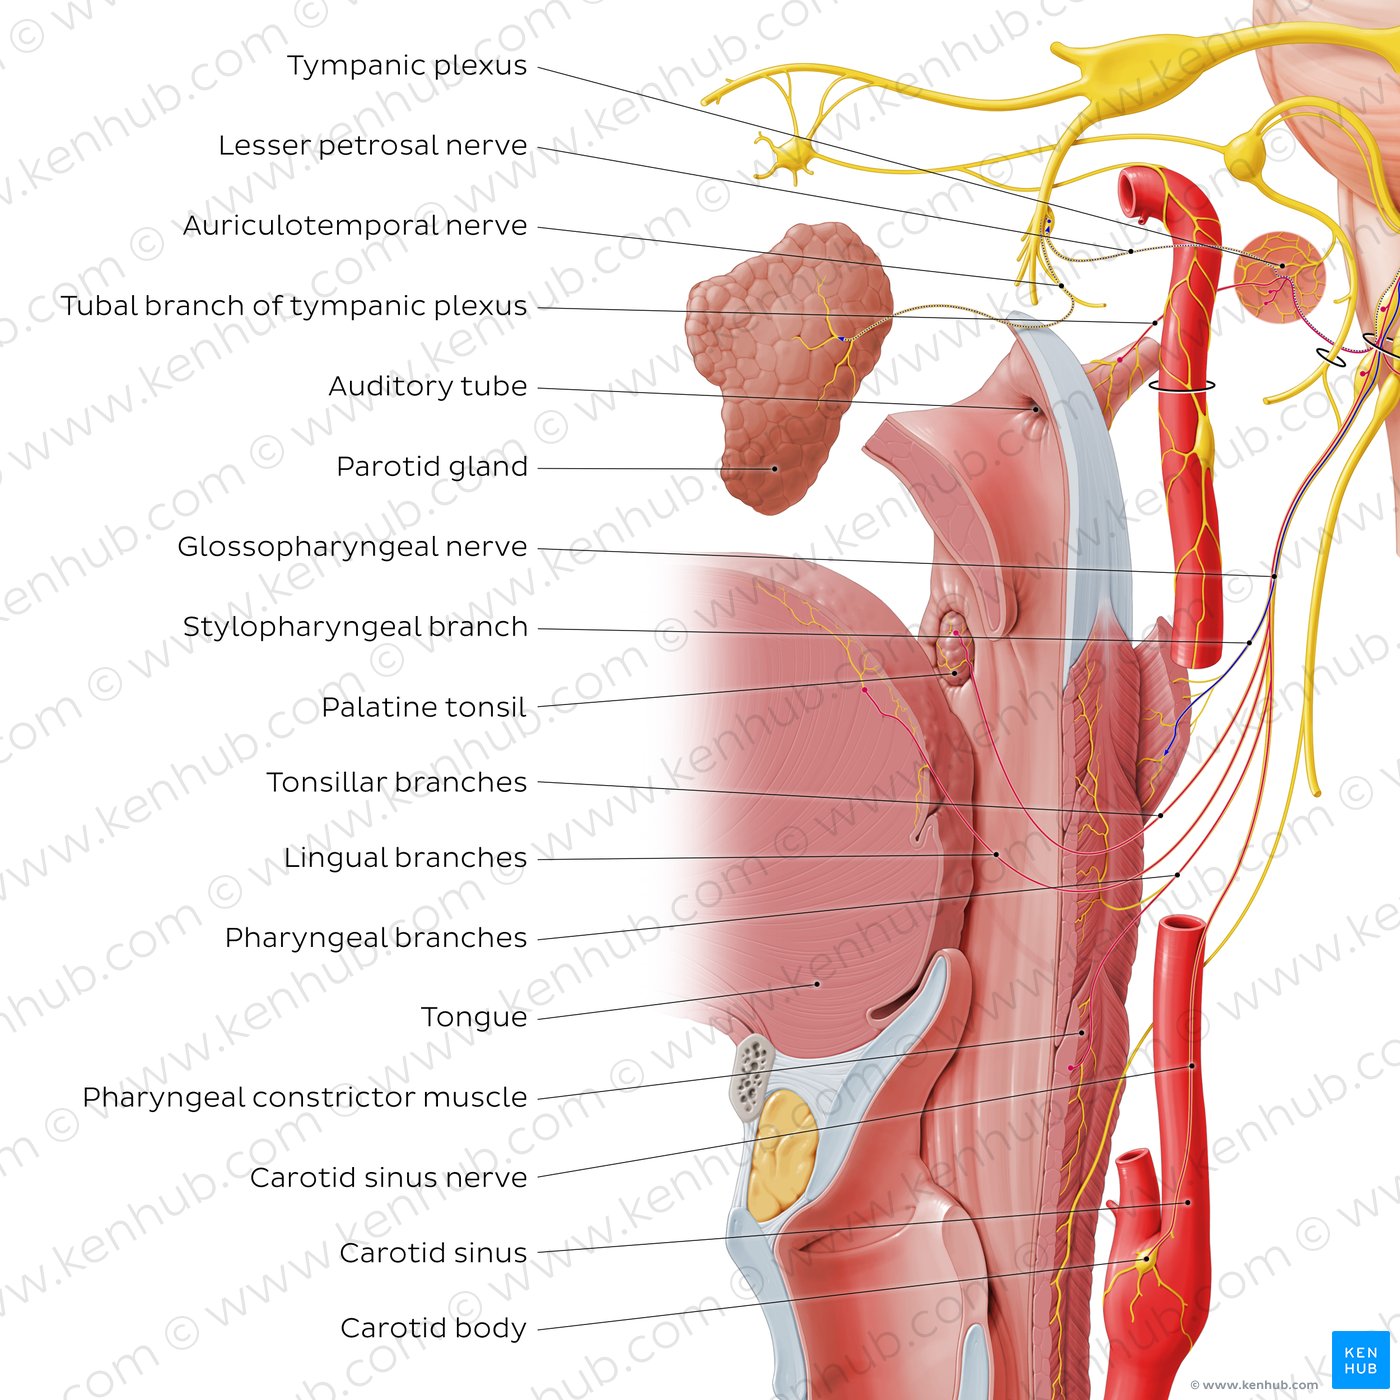 Glossopharyngeal nerve (distal branches)